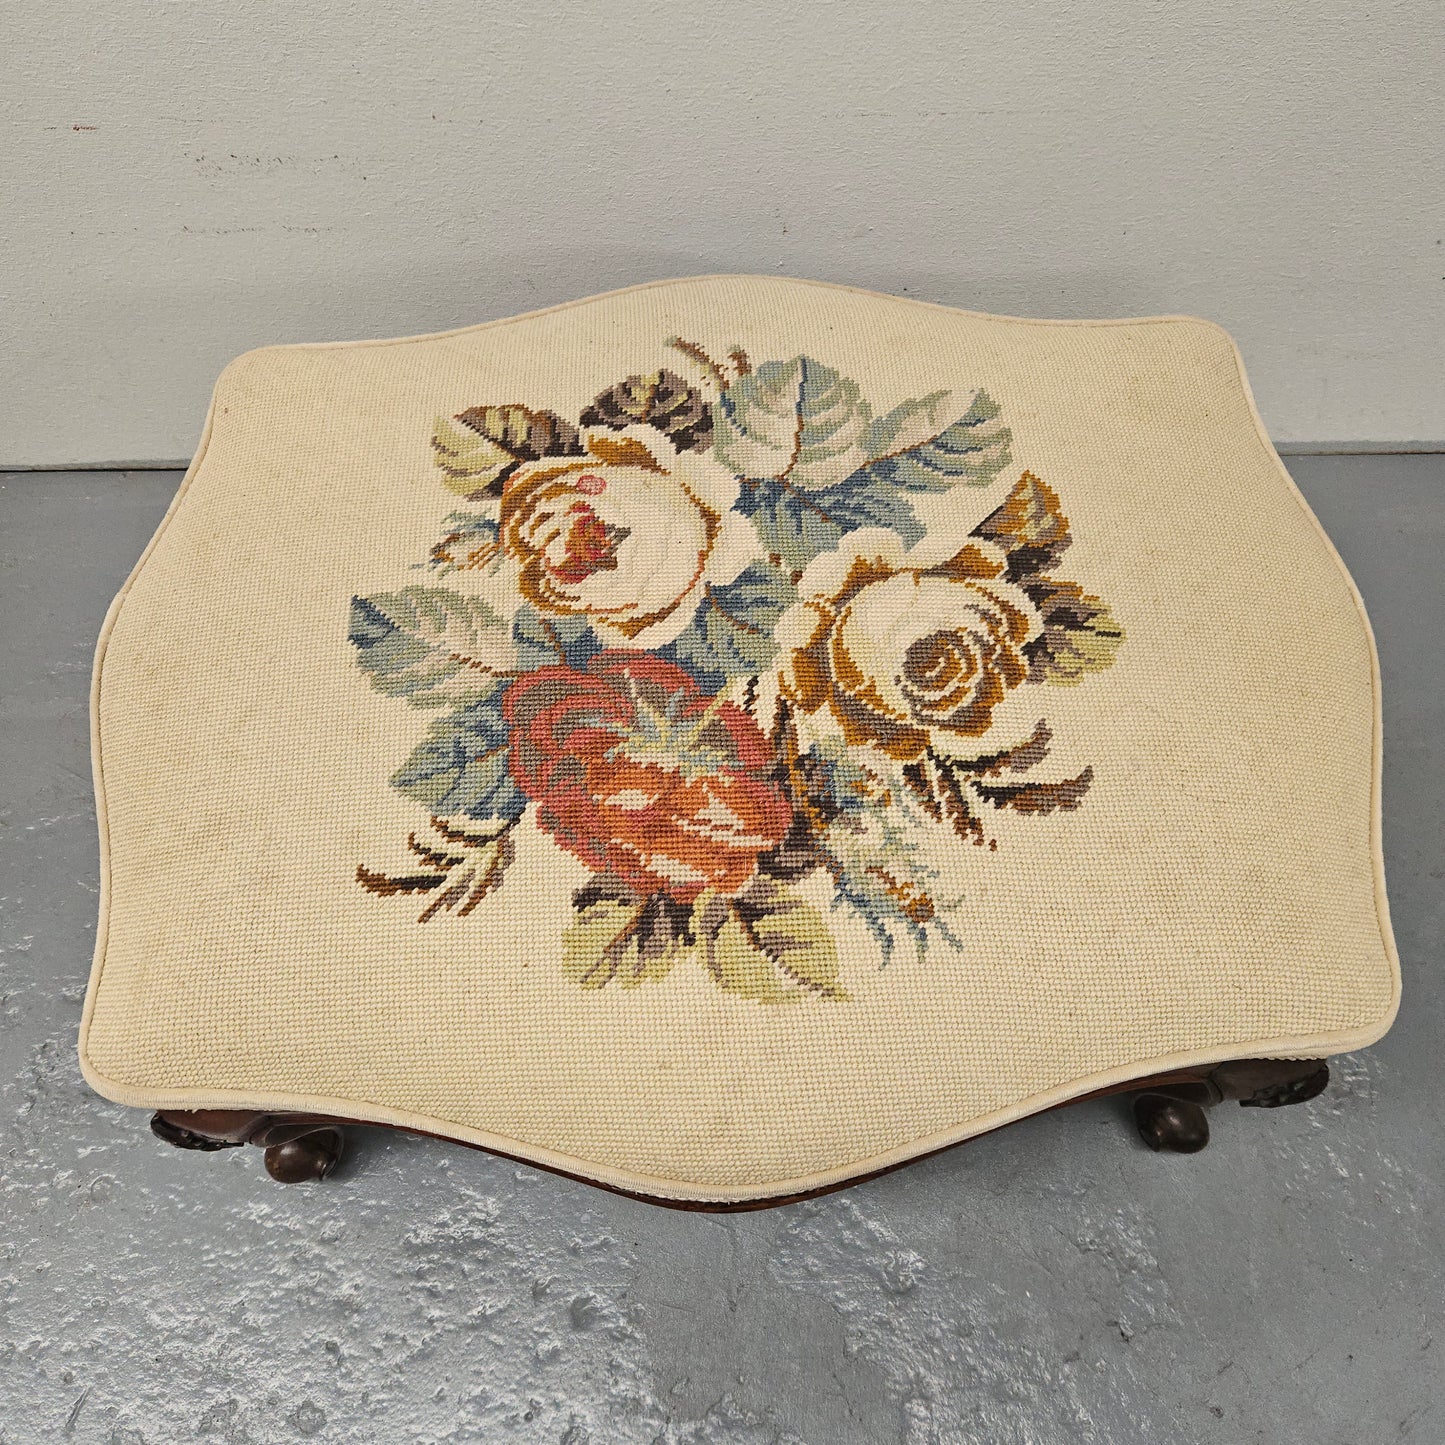 French Mahogany Louis XV Style Footstool With Floral Tapestry